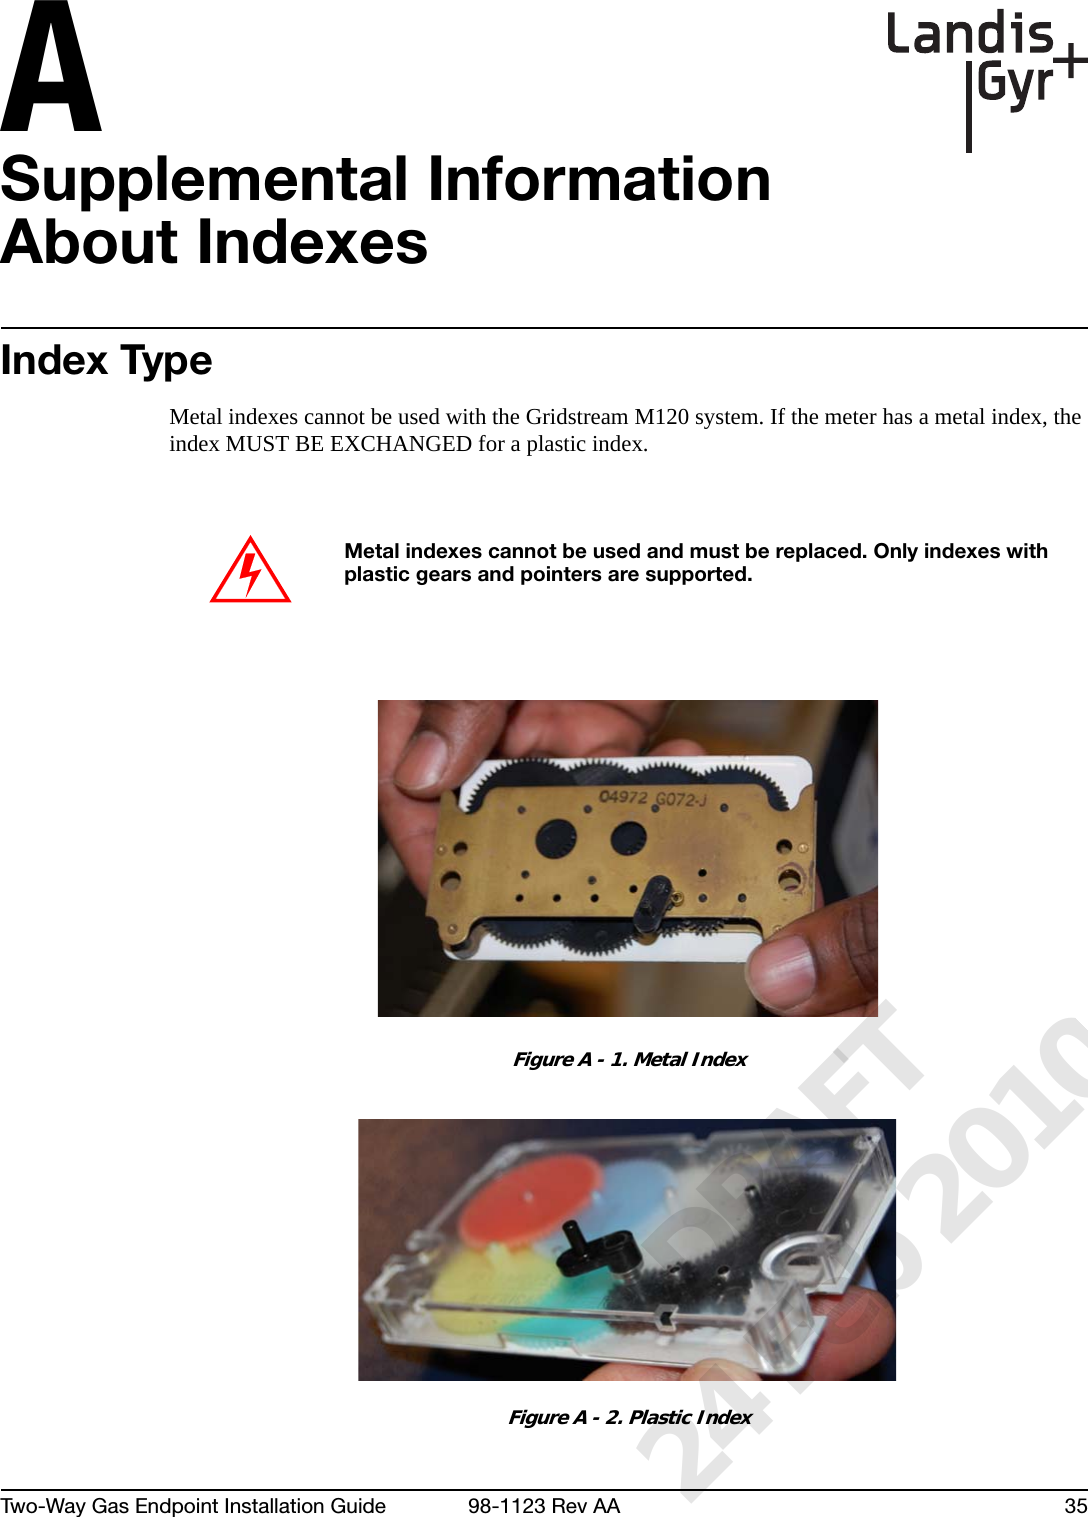 ATwo-Way Gas Endpoint Installation Guide 98-1123 Rev AA 35Supplemental Information About IndexesIndex TypeMetal indexes cannot be used with the Gridstream M120 system. If the meter has a metal index, the index MUST BE EXCHANGED for a plastic index.Figure A - 1. Metal IndexFigure A - 2. Plastic IndexMetal indexes cannot be used and must be replaced. Only indexes with plastic gears and pointers are supported.      DRAFT 24 Feb 2010